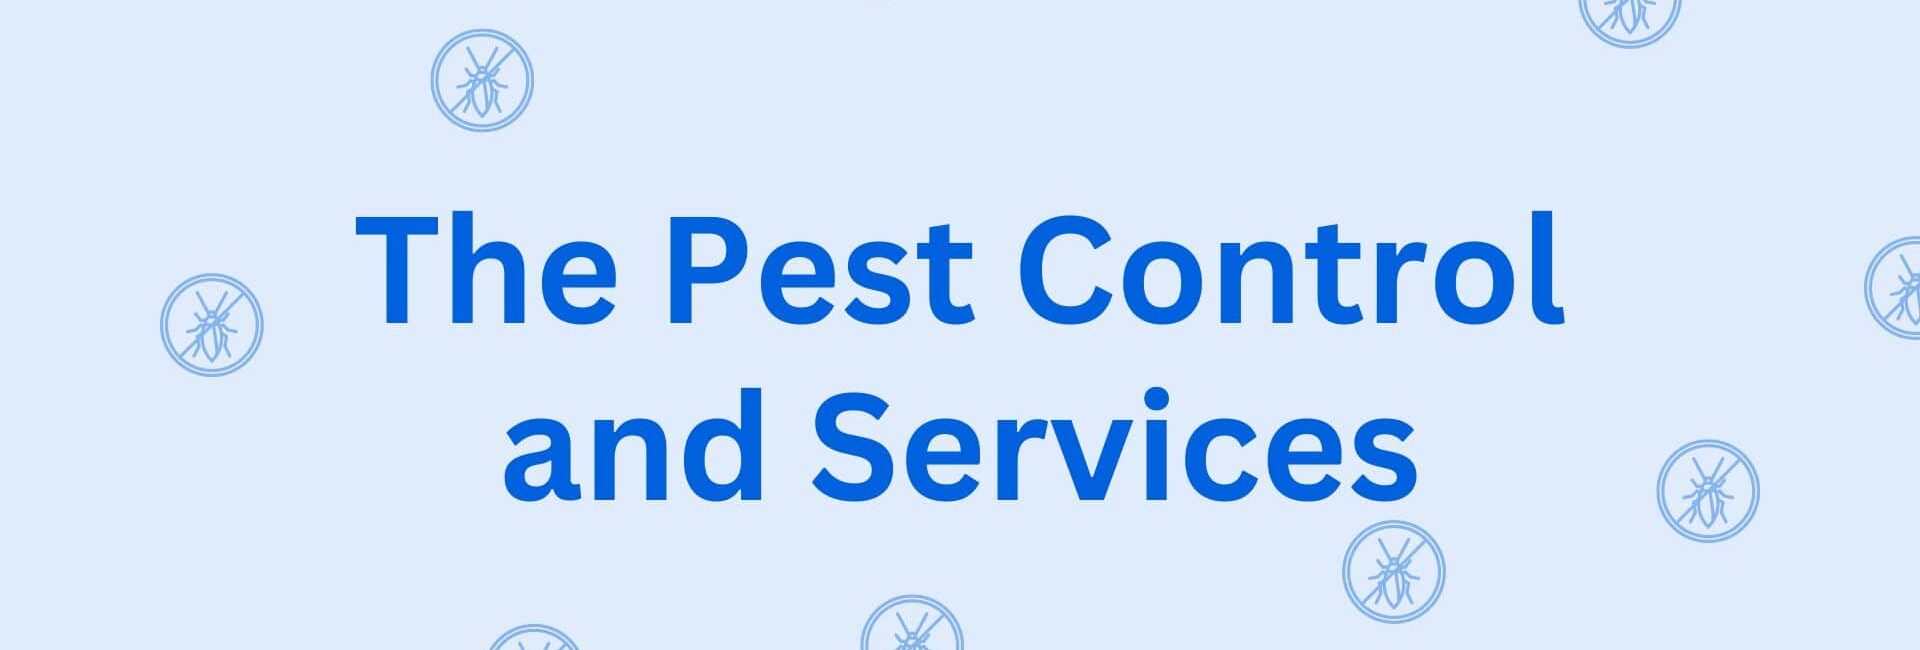 the pest control - Pest Control Service in Hisar